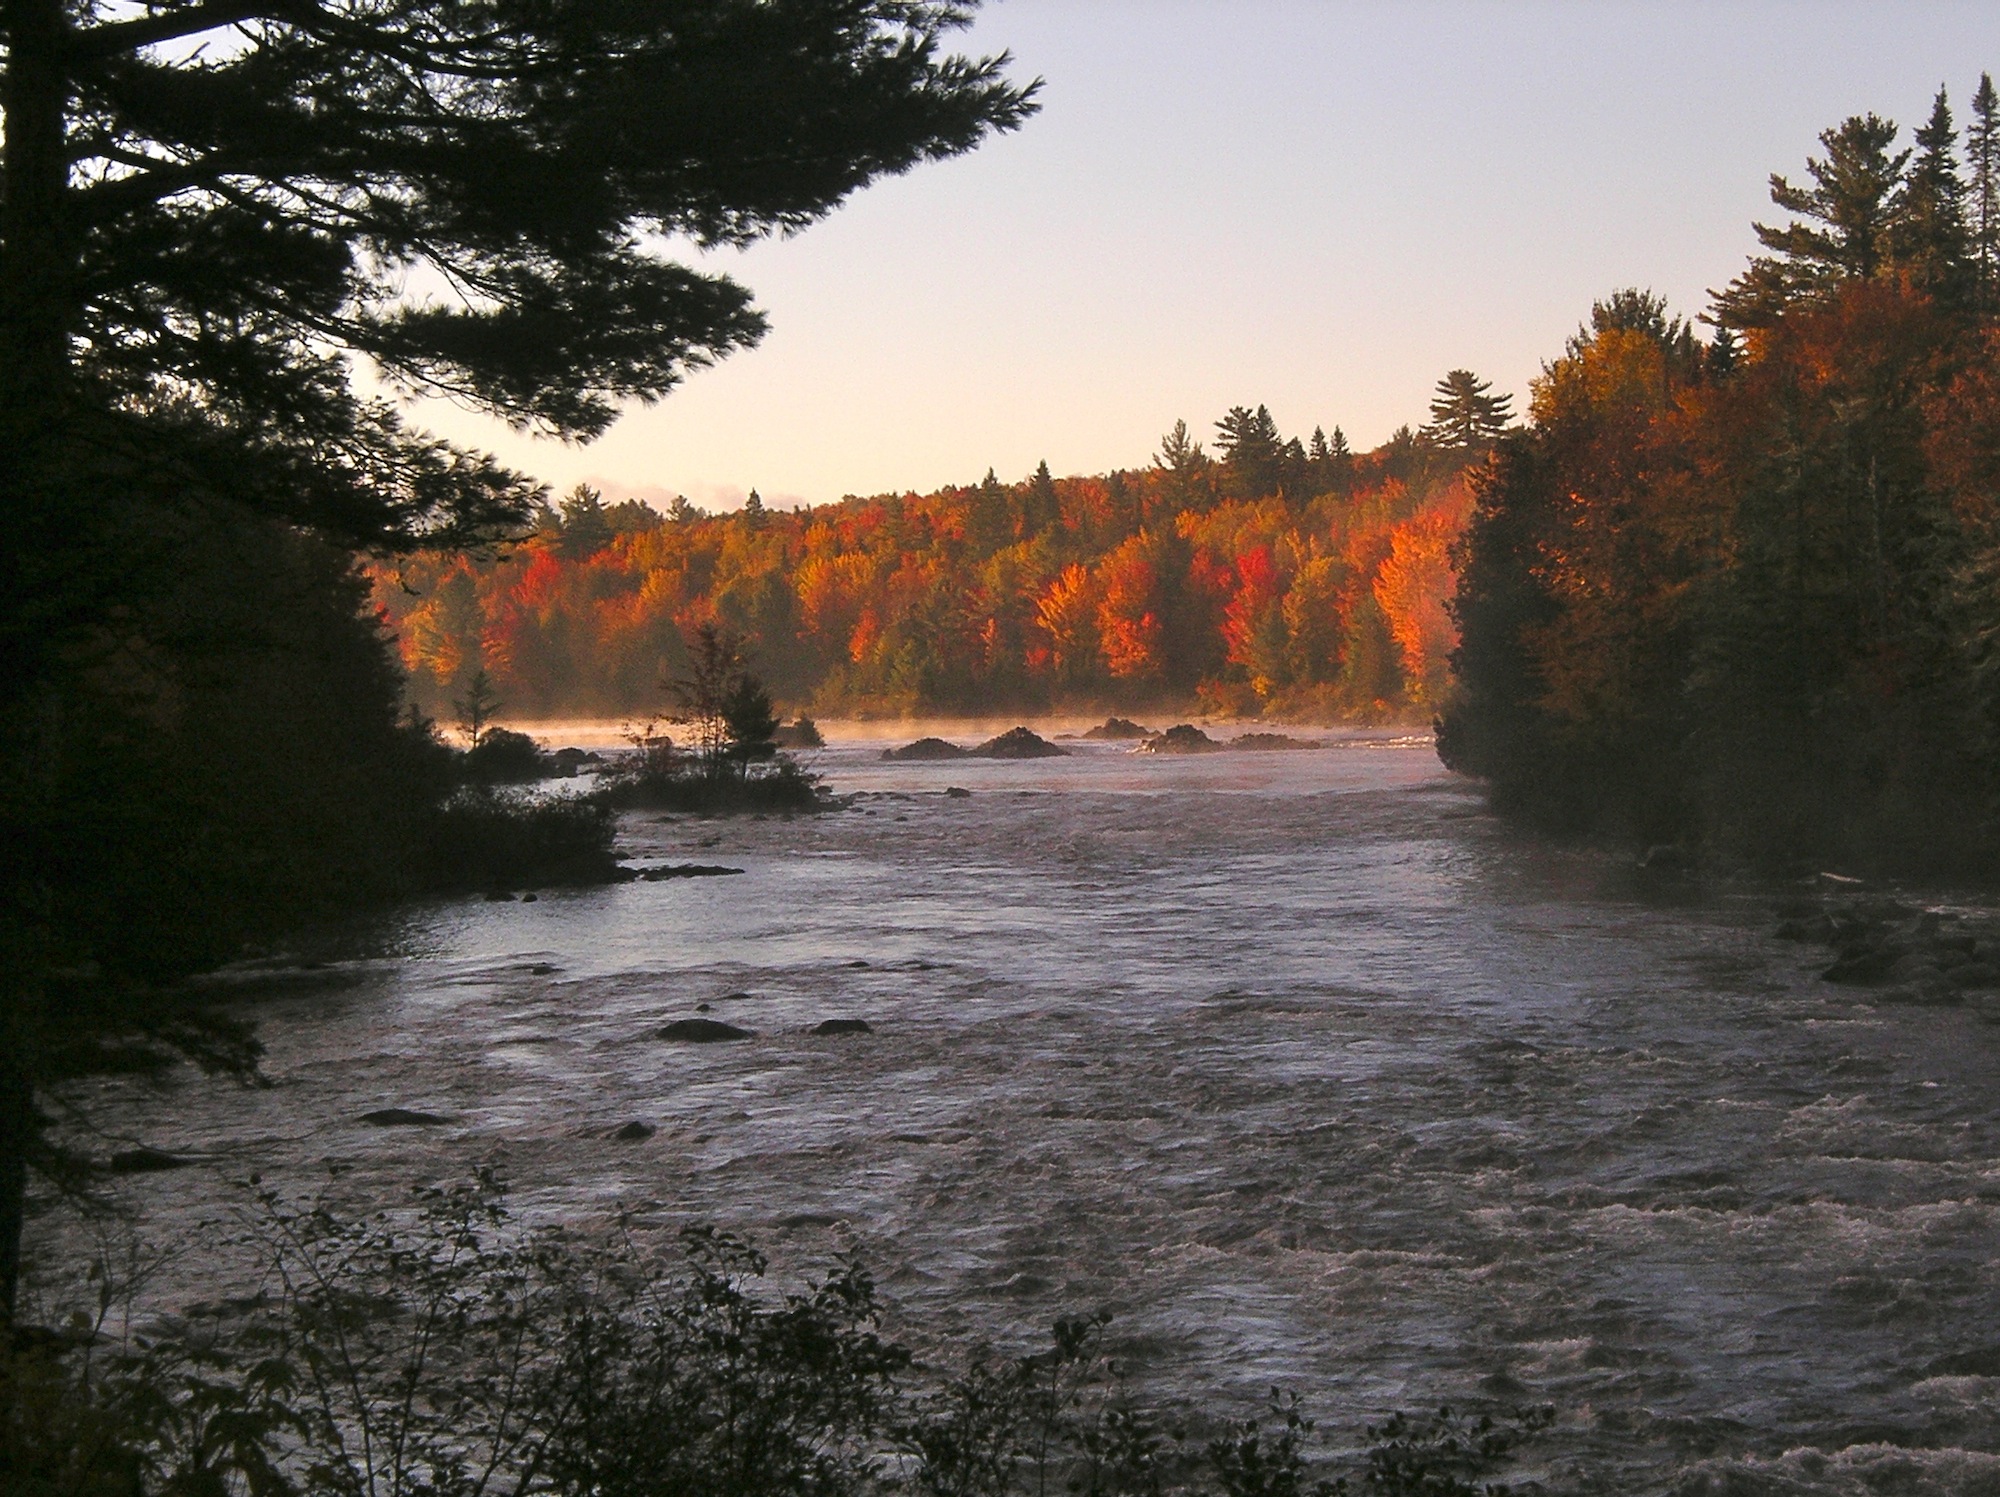 Rapid River, Maine 2012 (user submitted)